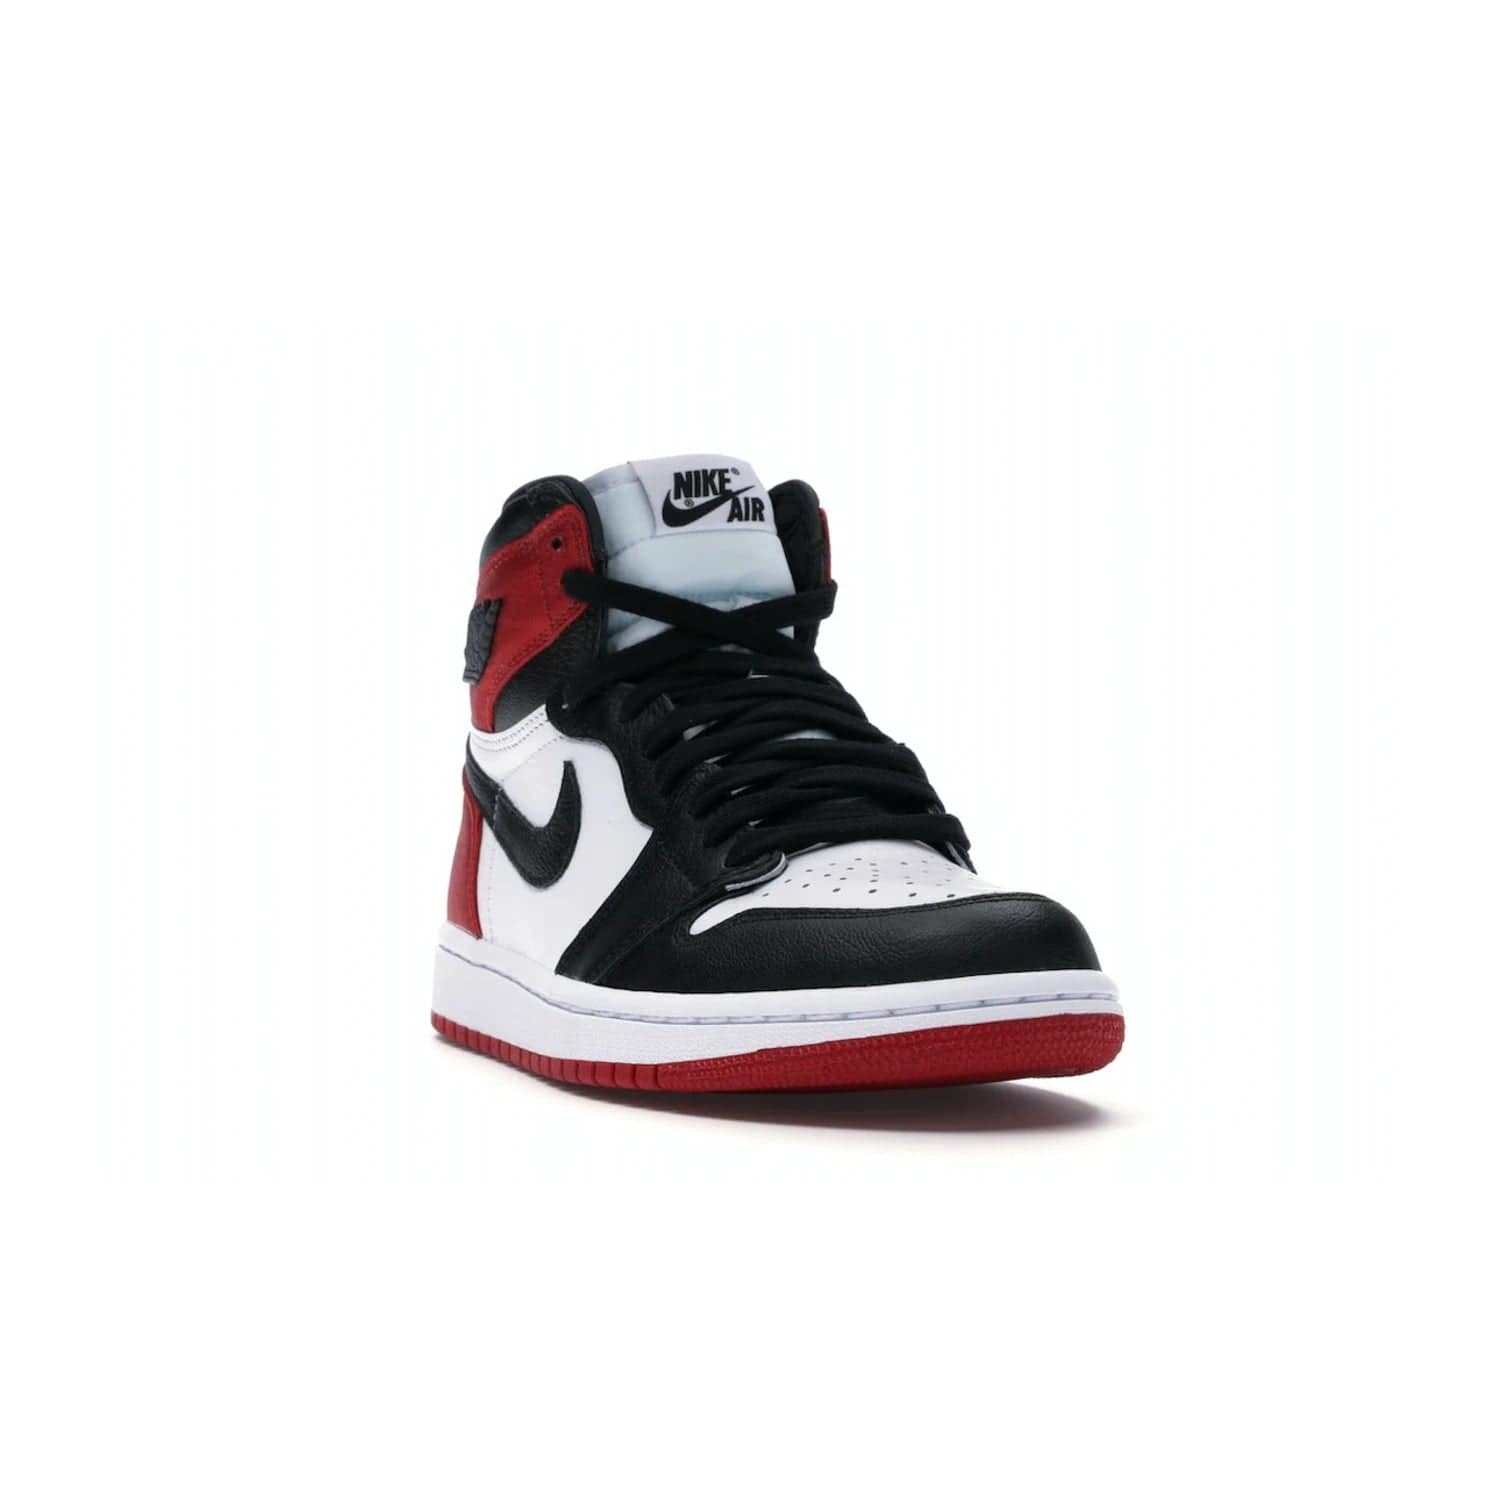 Jordan 1 Retro High Satin Black Toe (Women's) - Image 7 - Only at www.BallersClubKickz.com - Luxurious take on the timeless Air Jordan 1. Features a mix of black leather and satin materials with subtle University Red accents. Elevated look with metal Wings logo on the heel. Released in August 2019.